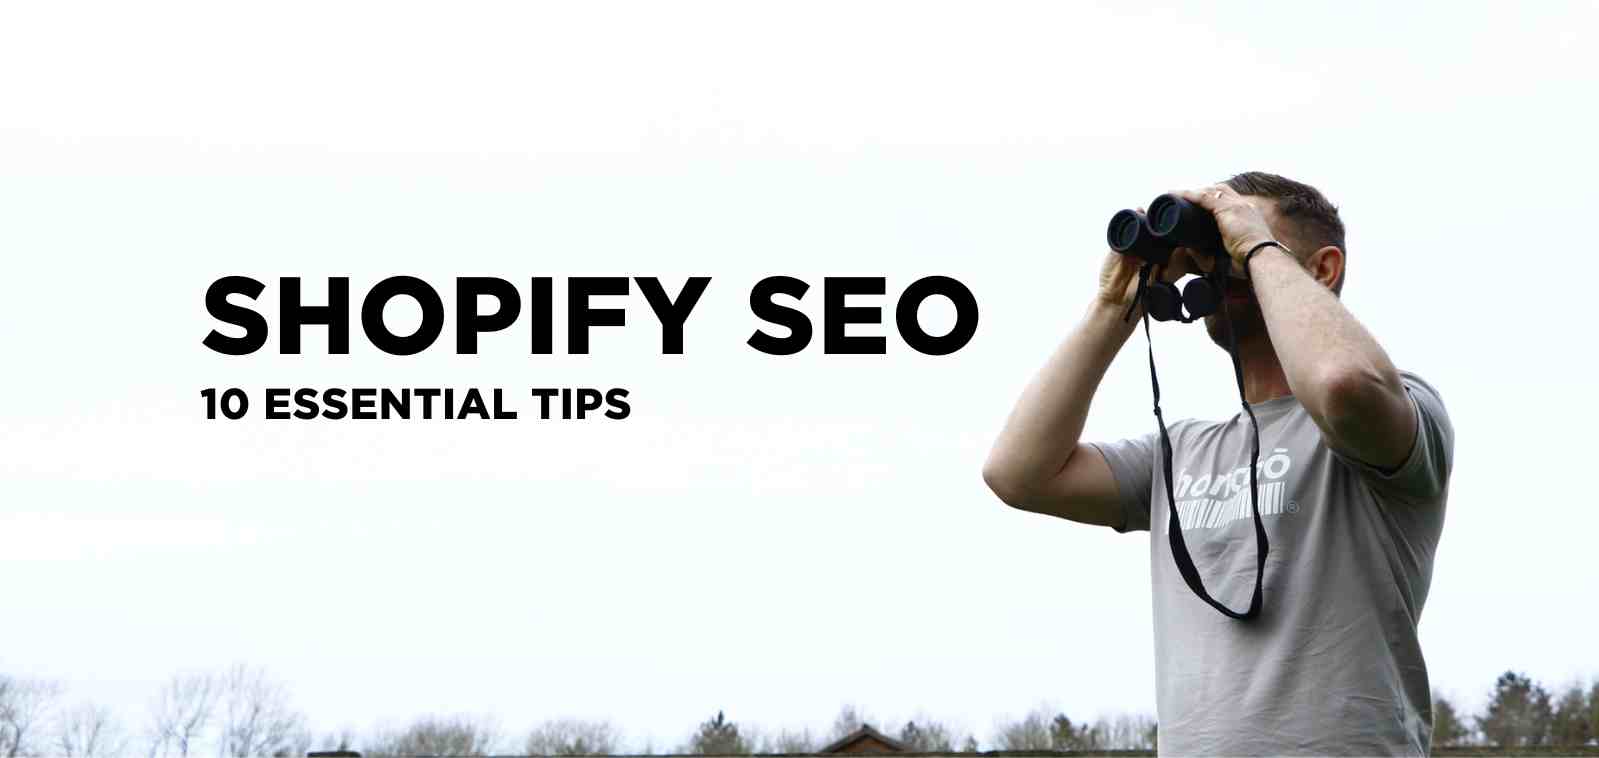 10 essential tips for shopify SEO